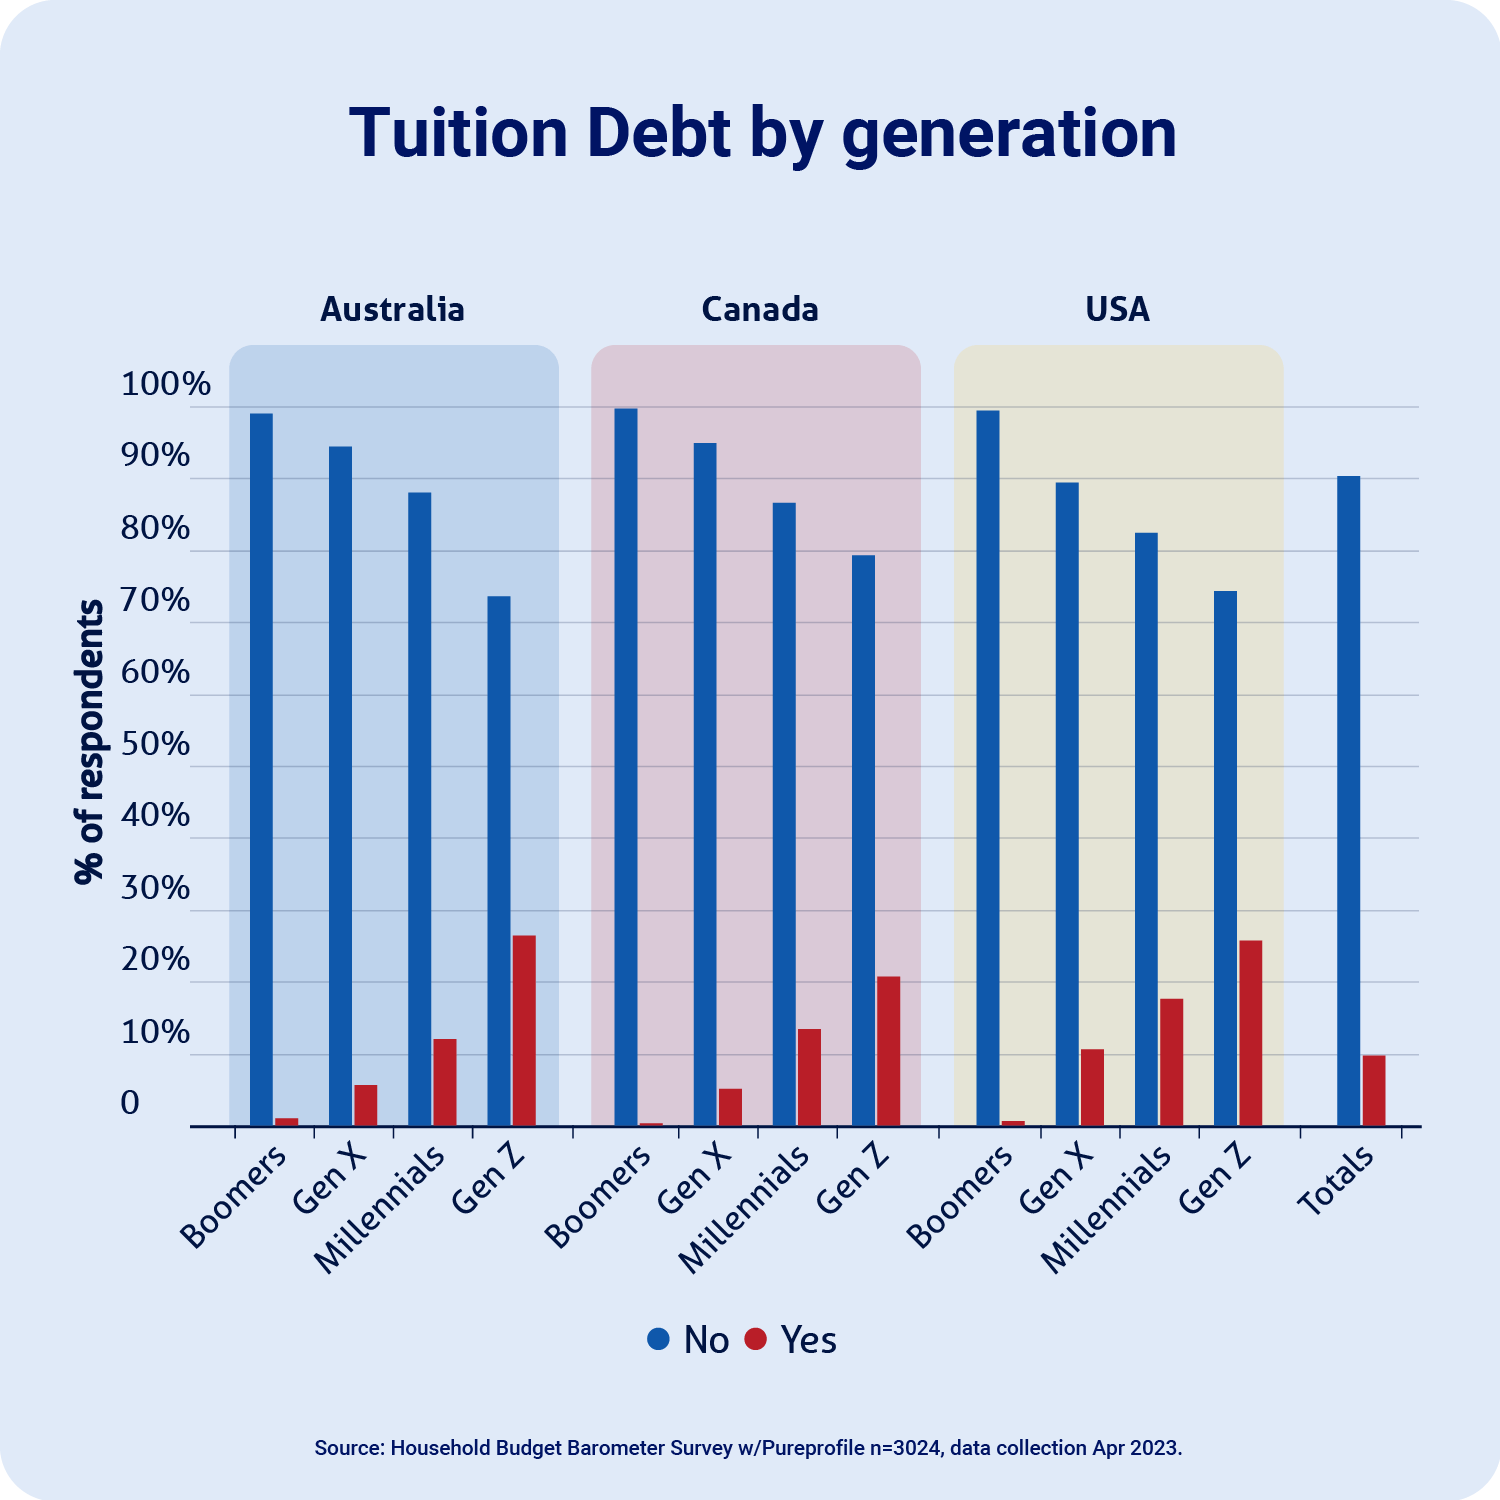 graph showing tuition debt by generation in Australia, Canada and USA